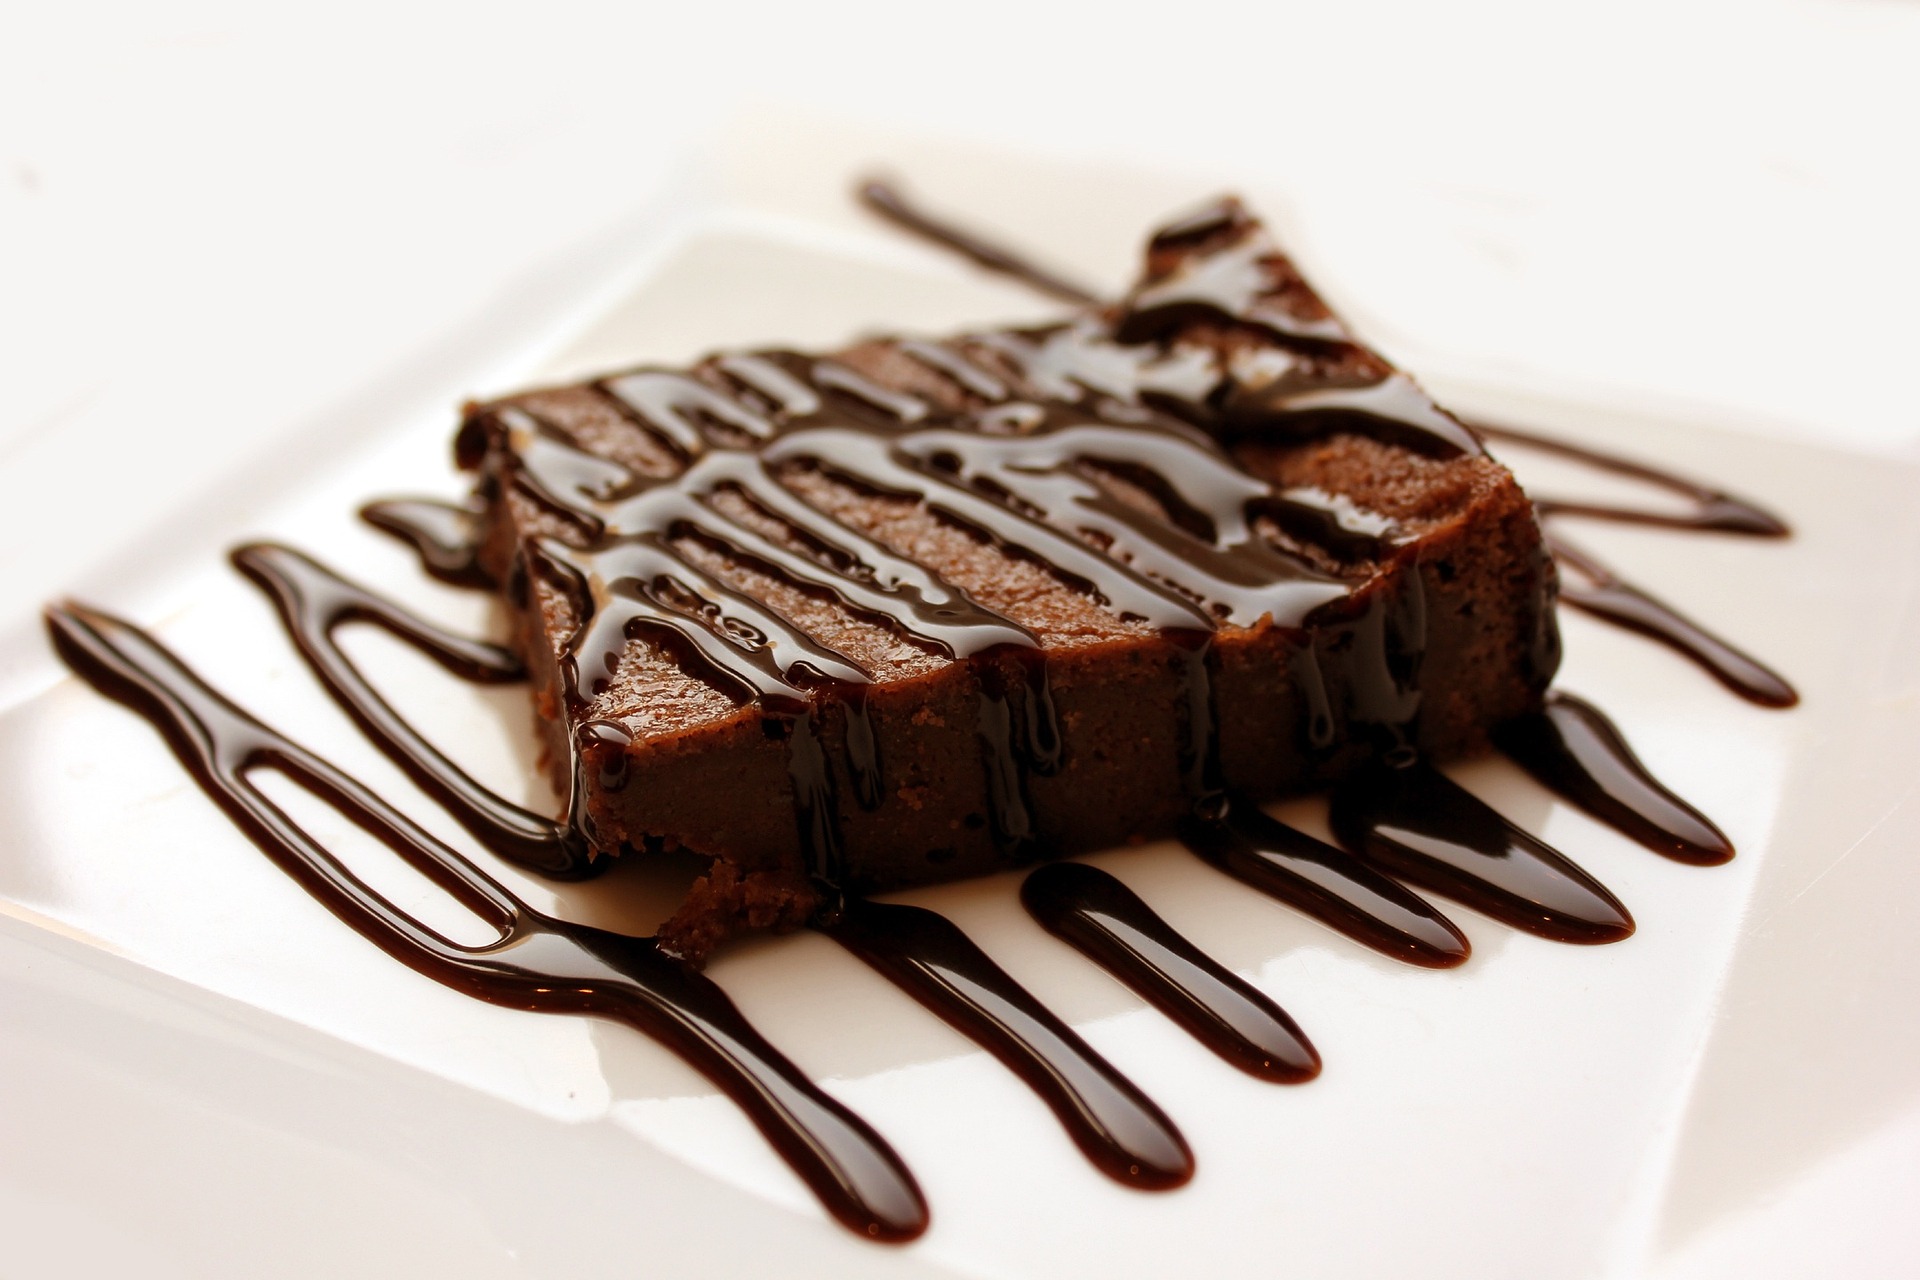 Enjoy brownies and more at Sawtooth Club